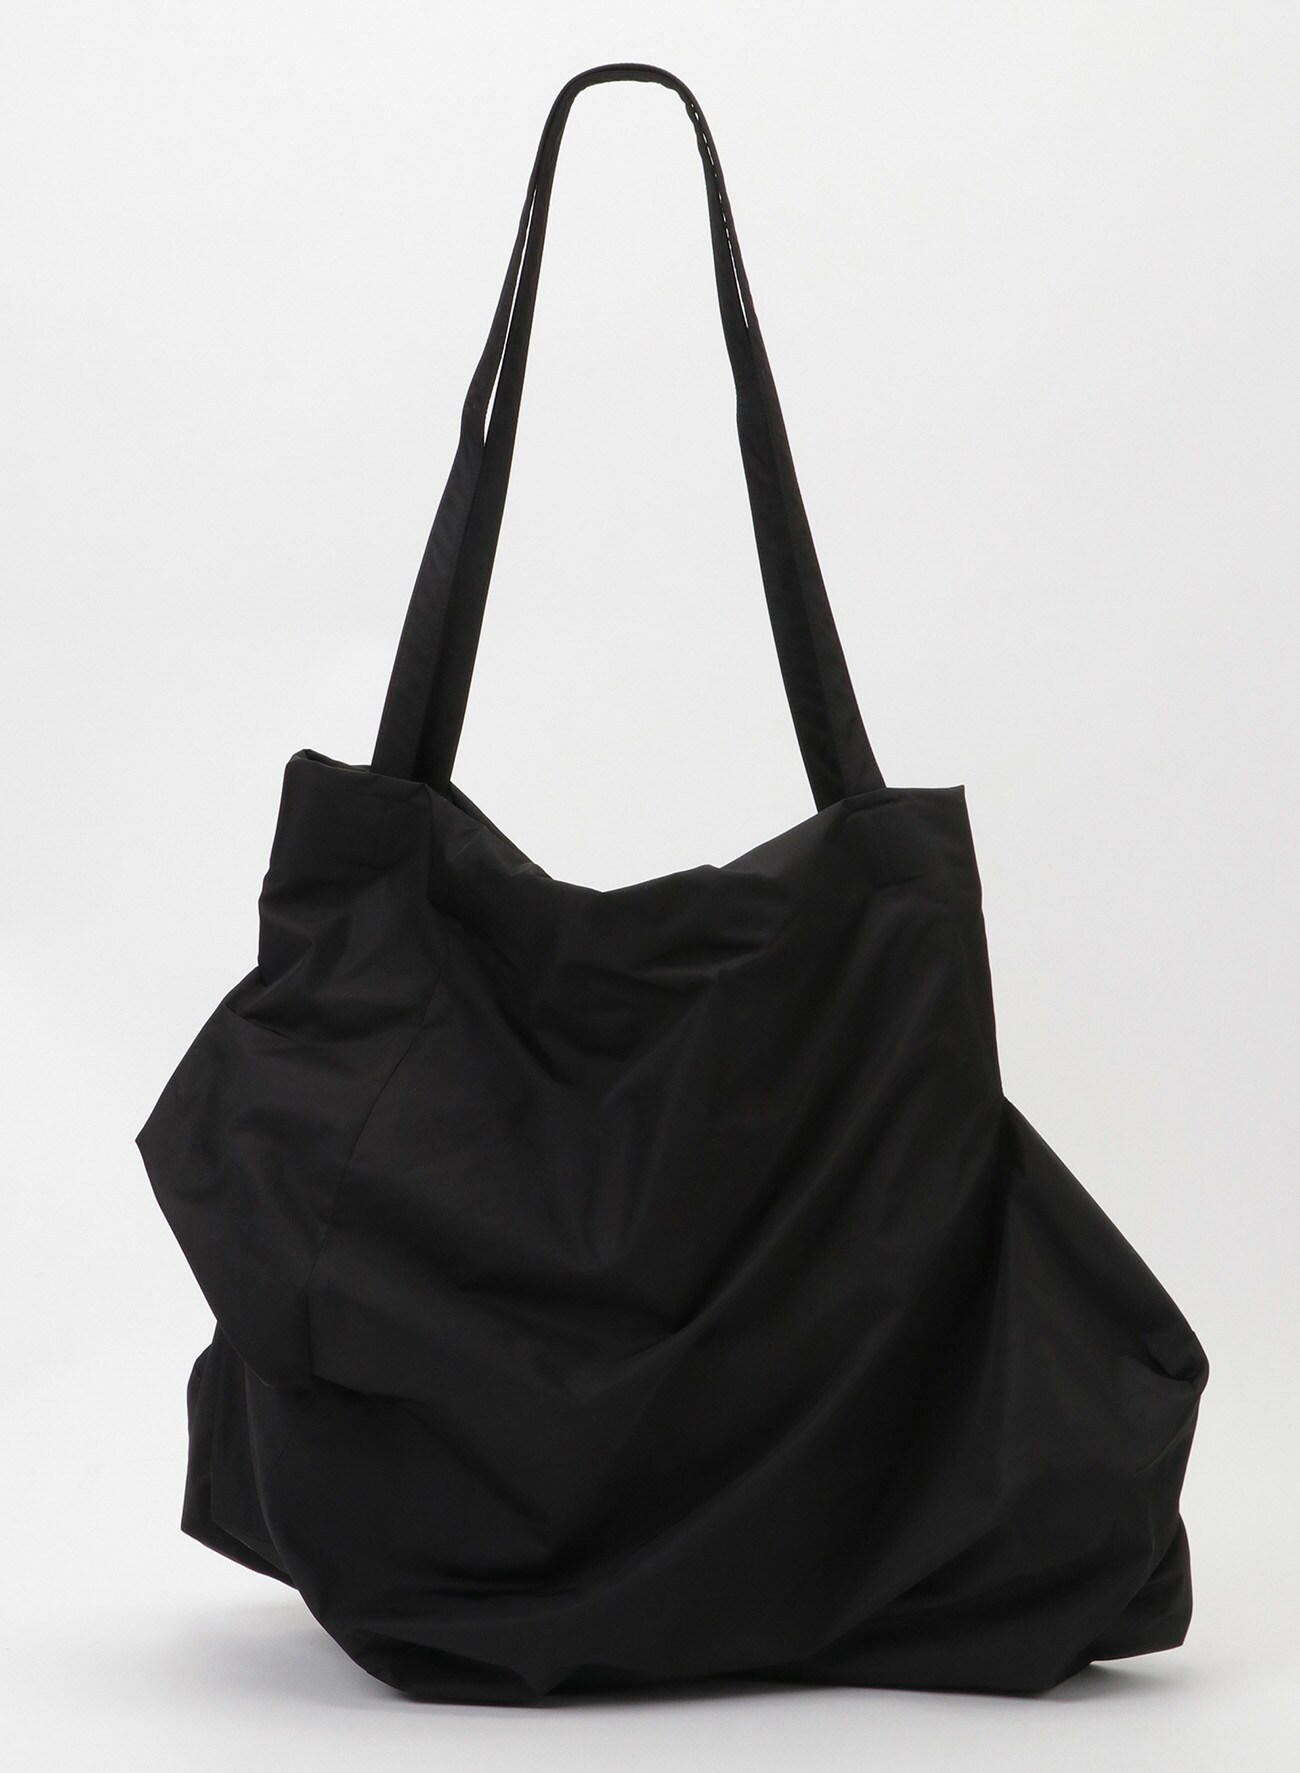 Unevenness tote